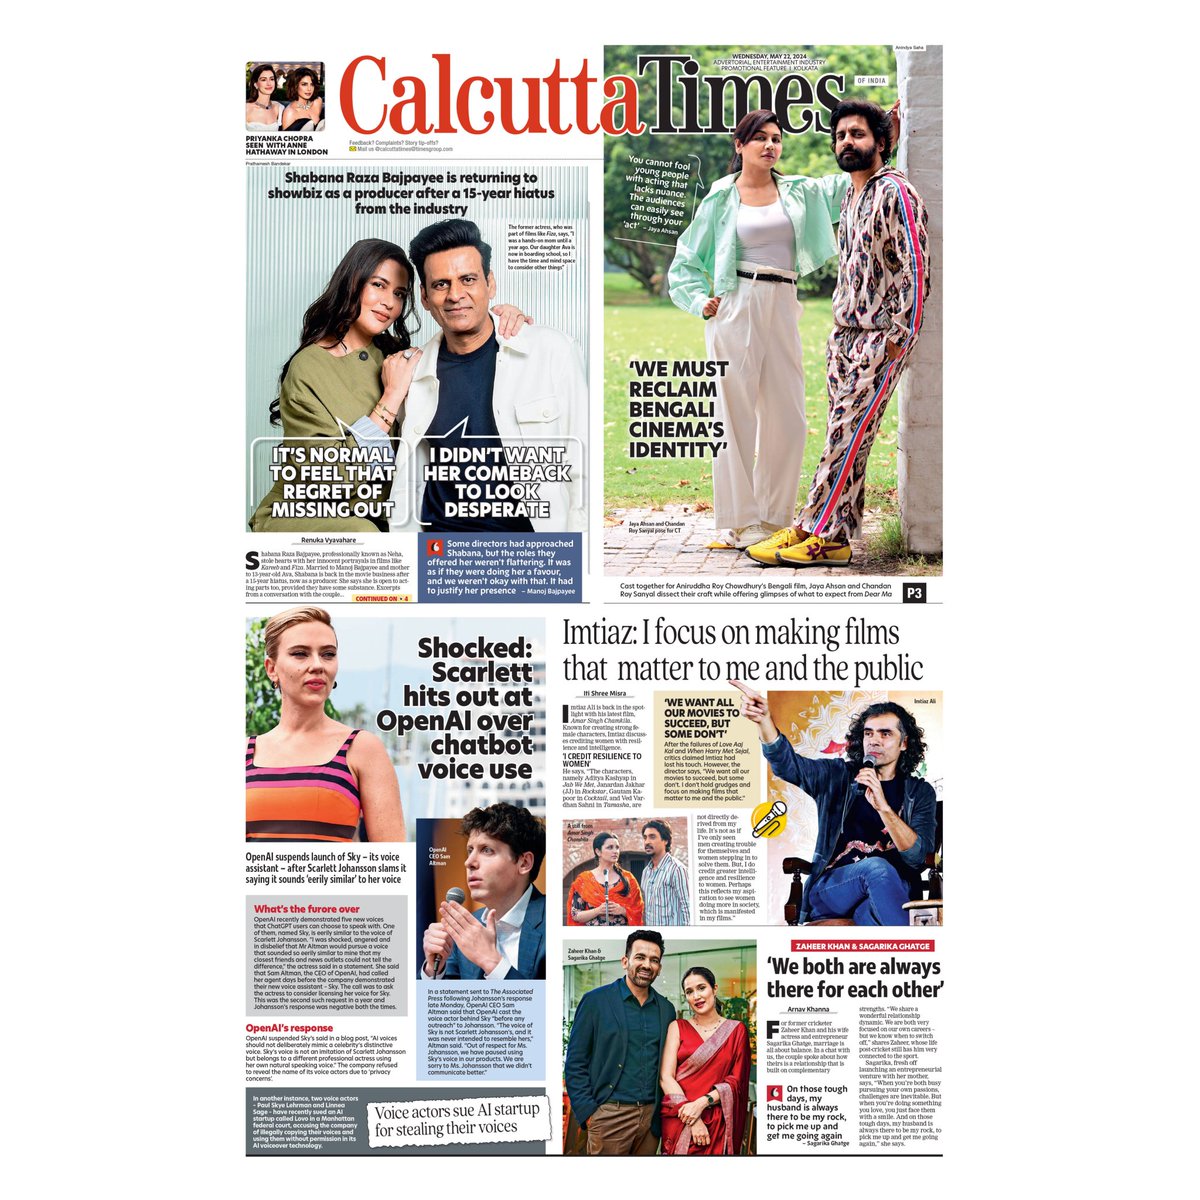 In today's Calcutta Times: An exclusive shoot with the cast of Dear Ma, Shabana Raza Bajpayee is returning to showbiz as a producer after a 15-year hiatus from the industry, and more 

#dearma #exclusiveshoot #jayaahsan #calcuttatimes